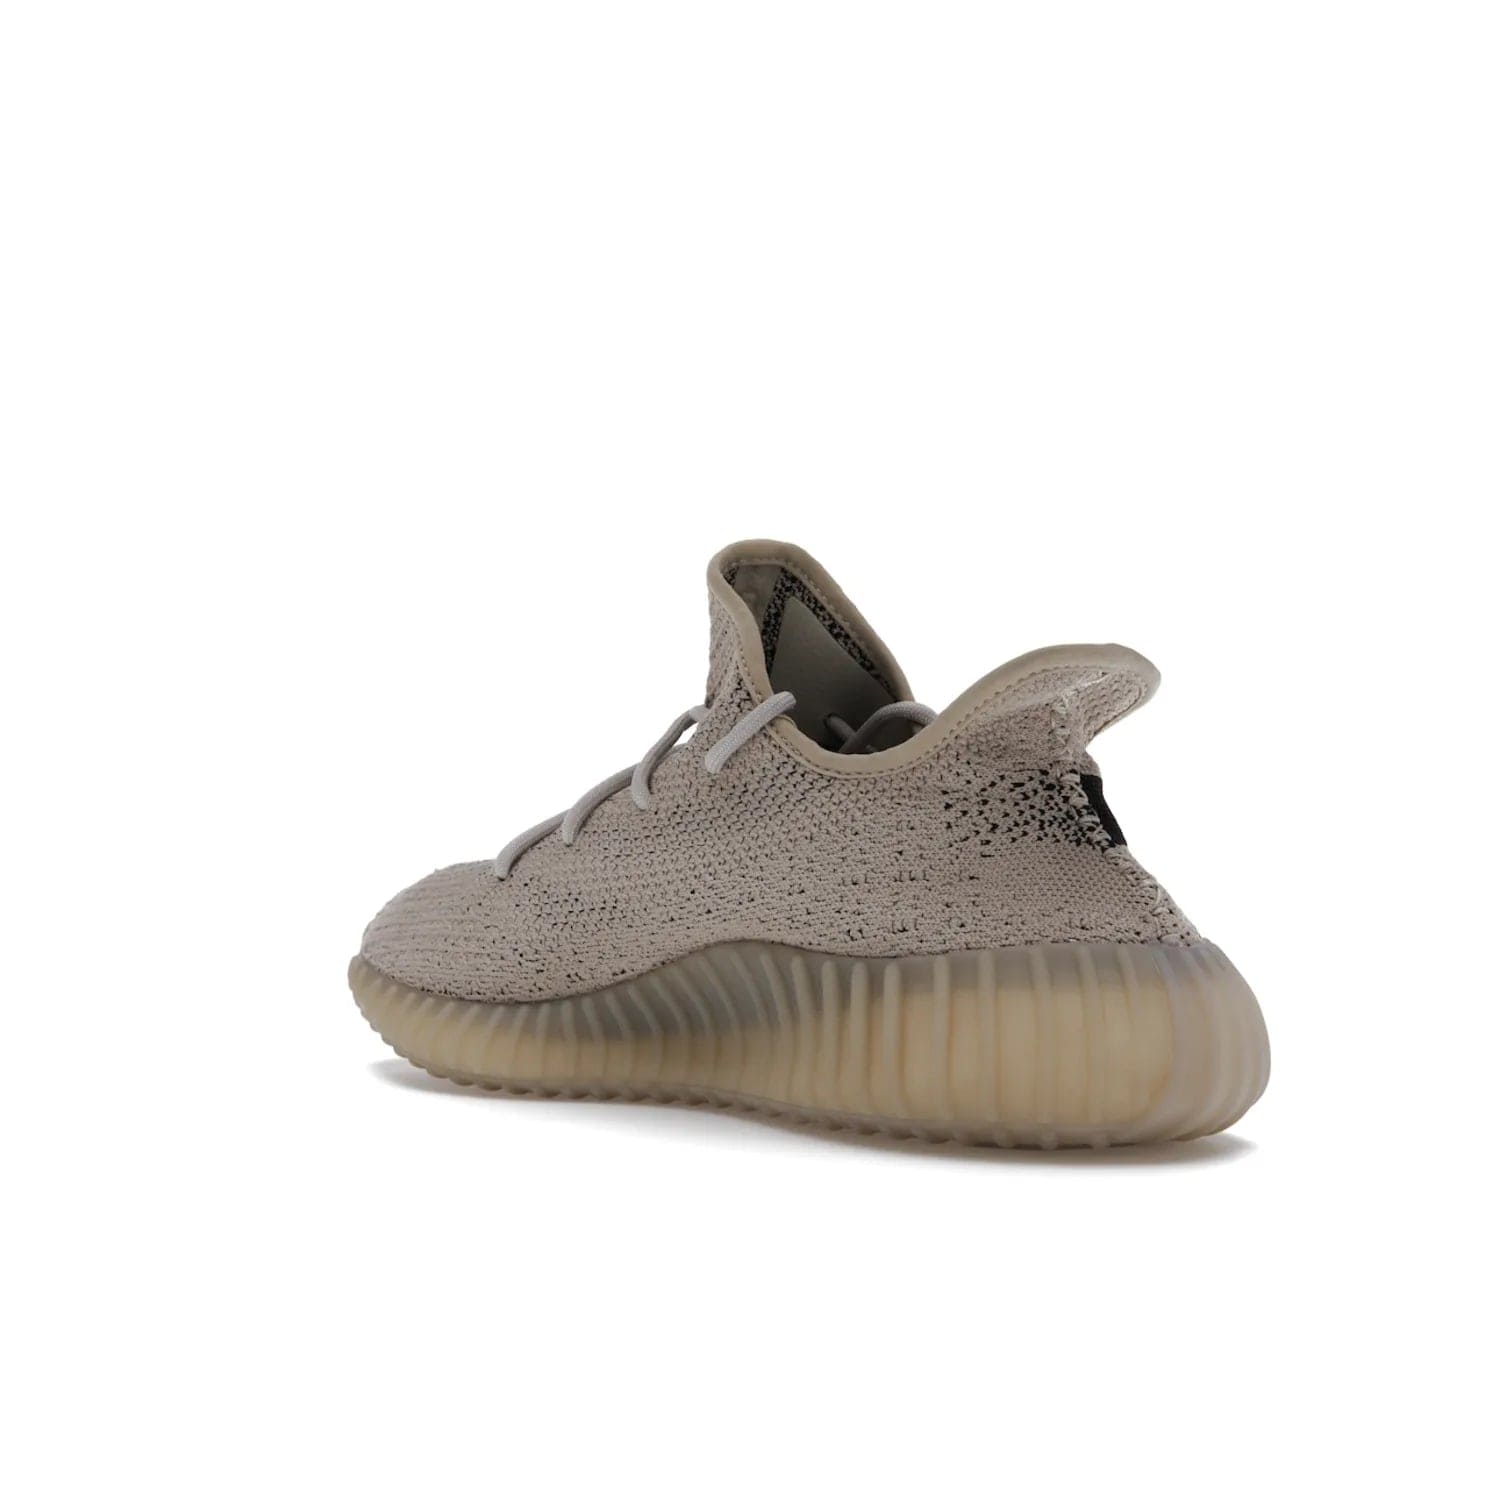 adidas Yeezy Boost 350 V2 Slate - Image 24 - Only at www.BallersClubKickz.com - Adidas Yeezy Boost 350 V2 Slate Core Black Slate featuring Primeknit upper, Boost midsole and semi-translucent TPU cage. Launched on 3/9/2022, retailed at $230.